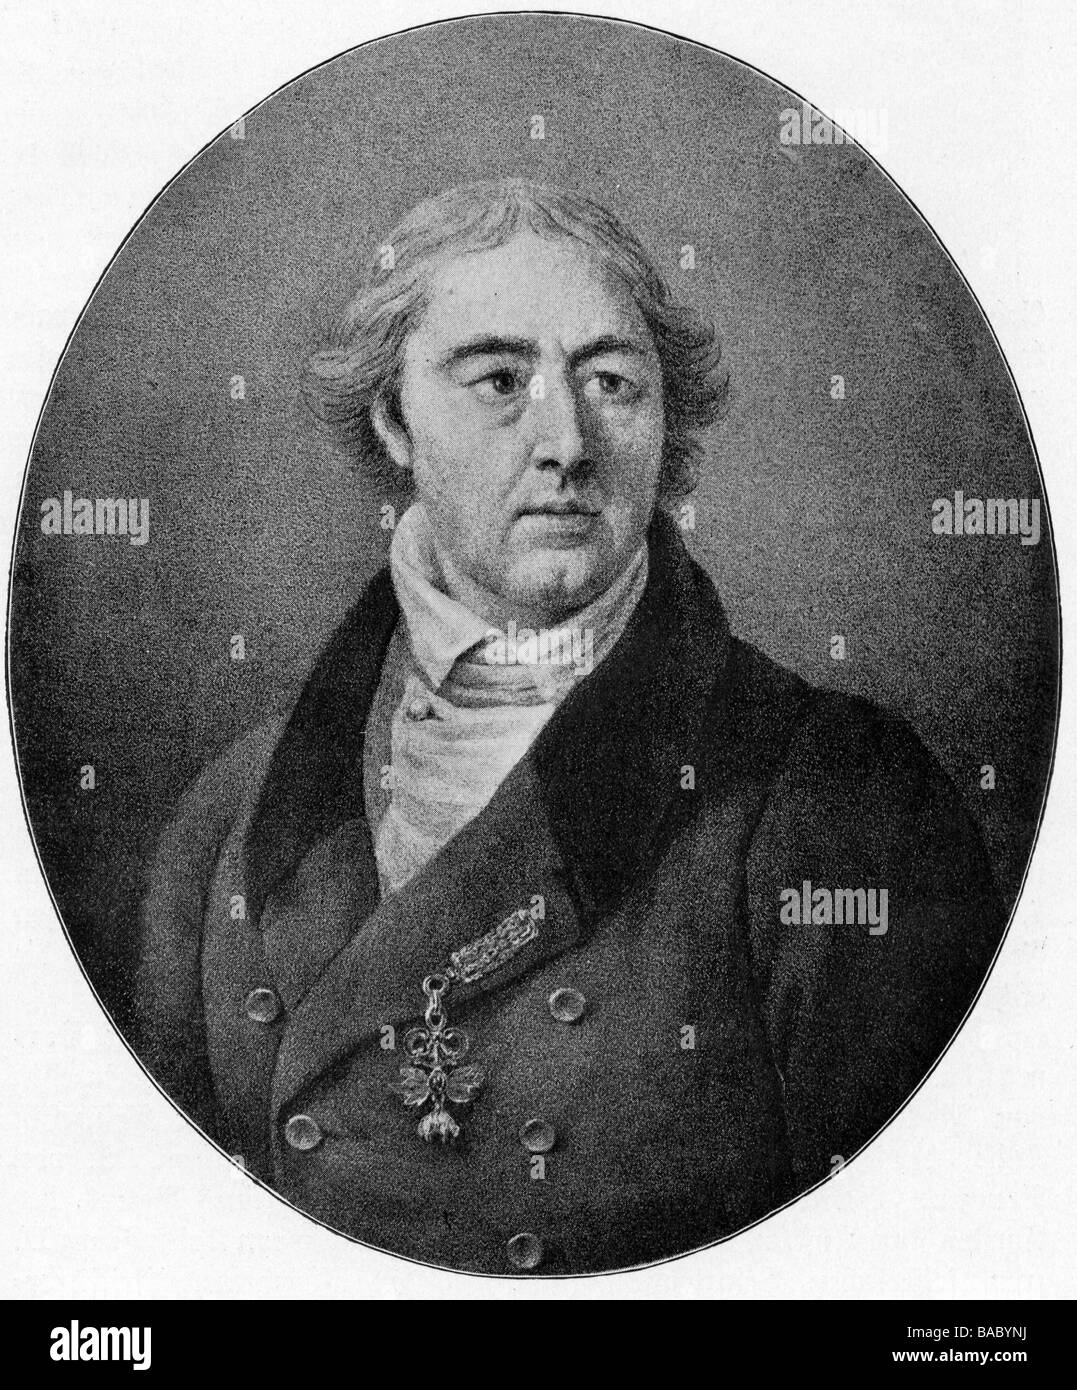 Thurn und Taxis, Karl Alexander Prince of, 22.2.1770 - 15.7.1827, after lithograph, early 19th century, Stock Photo